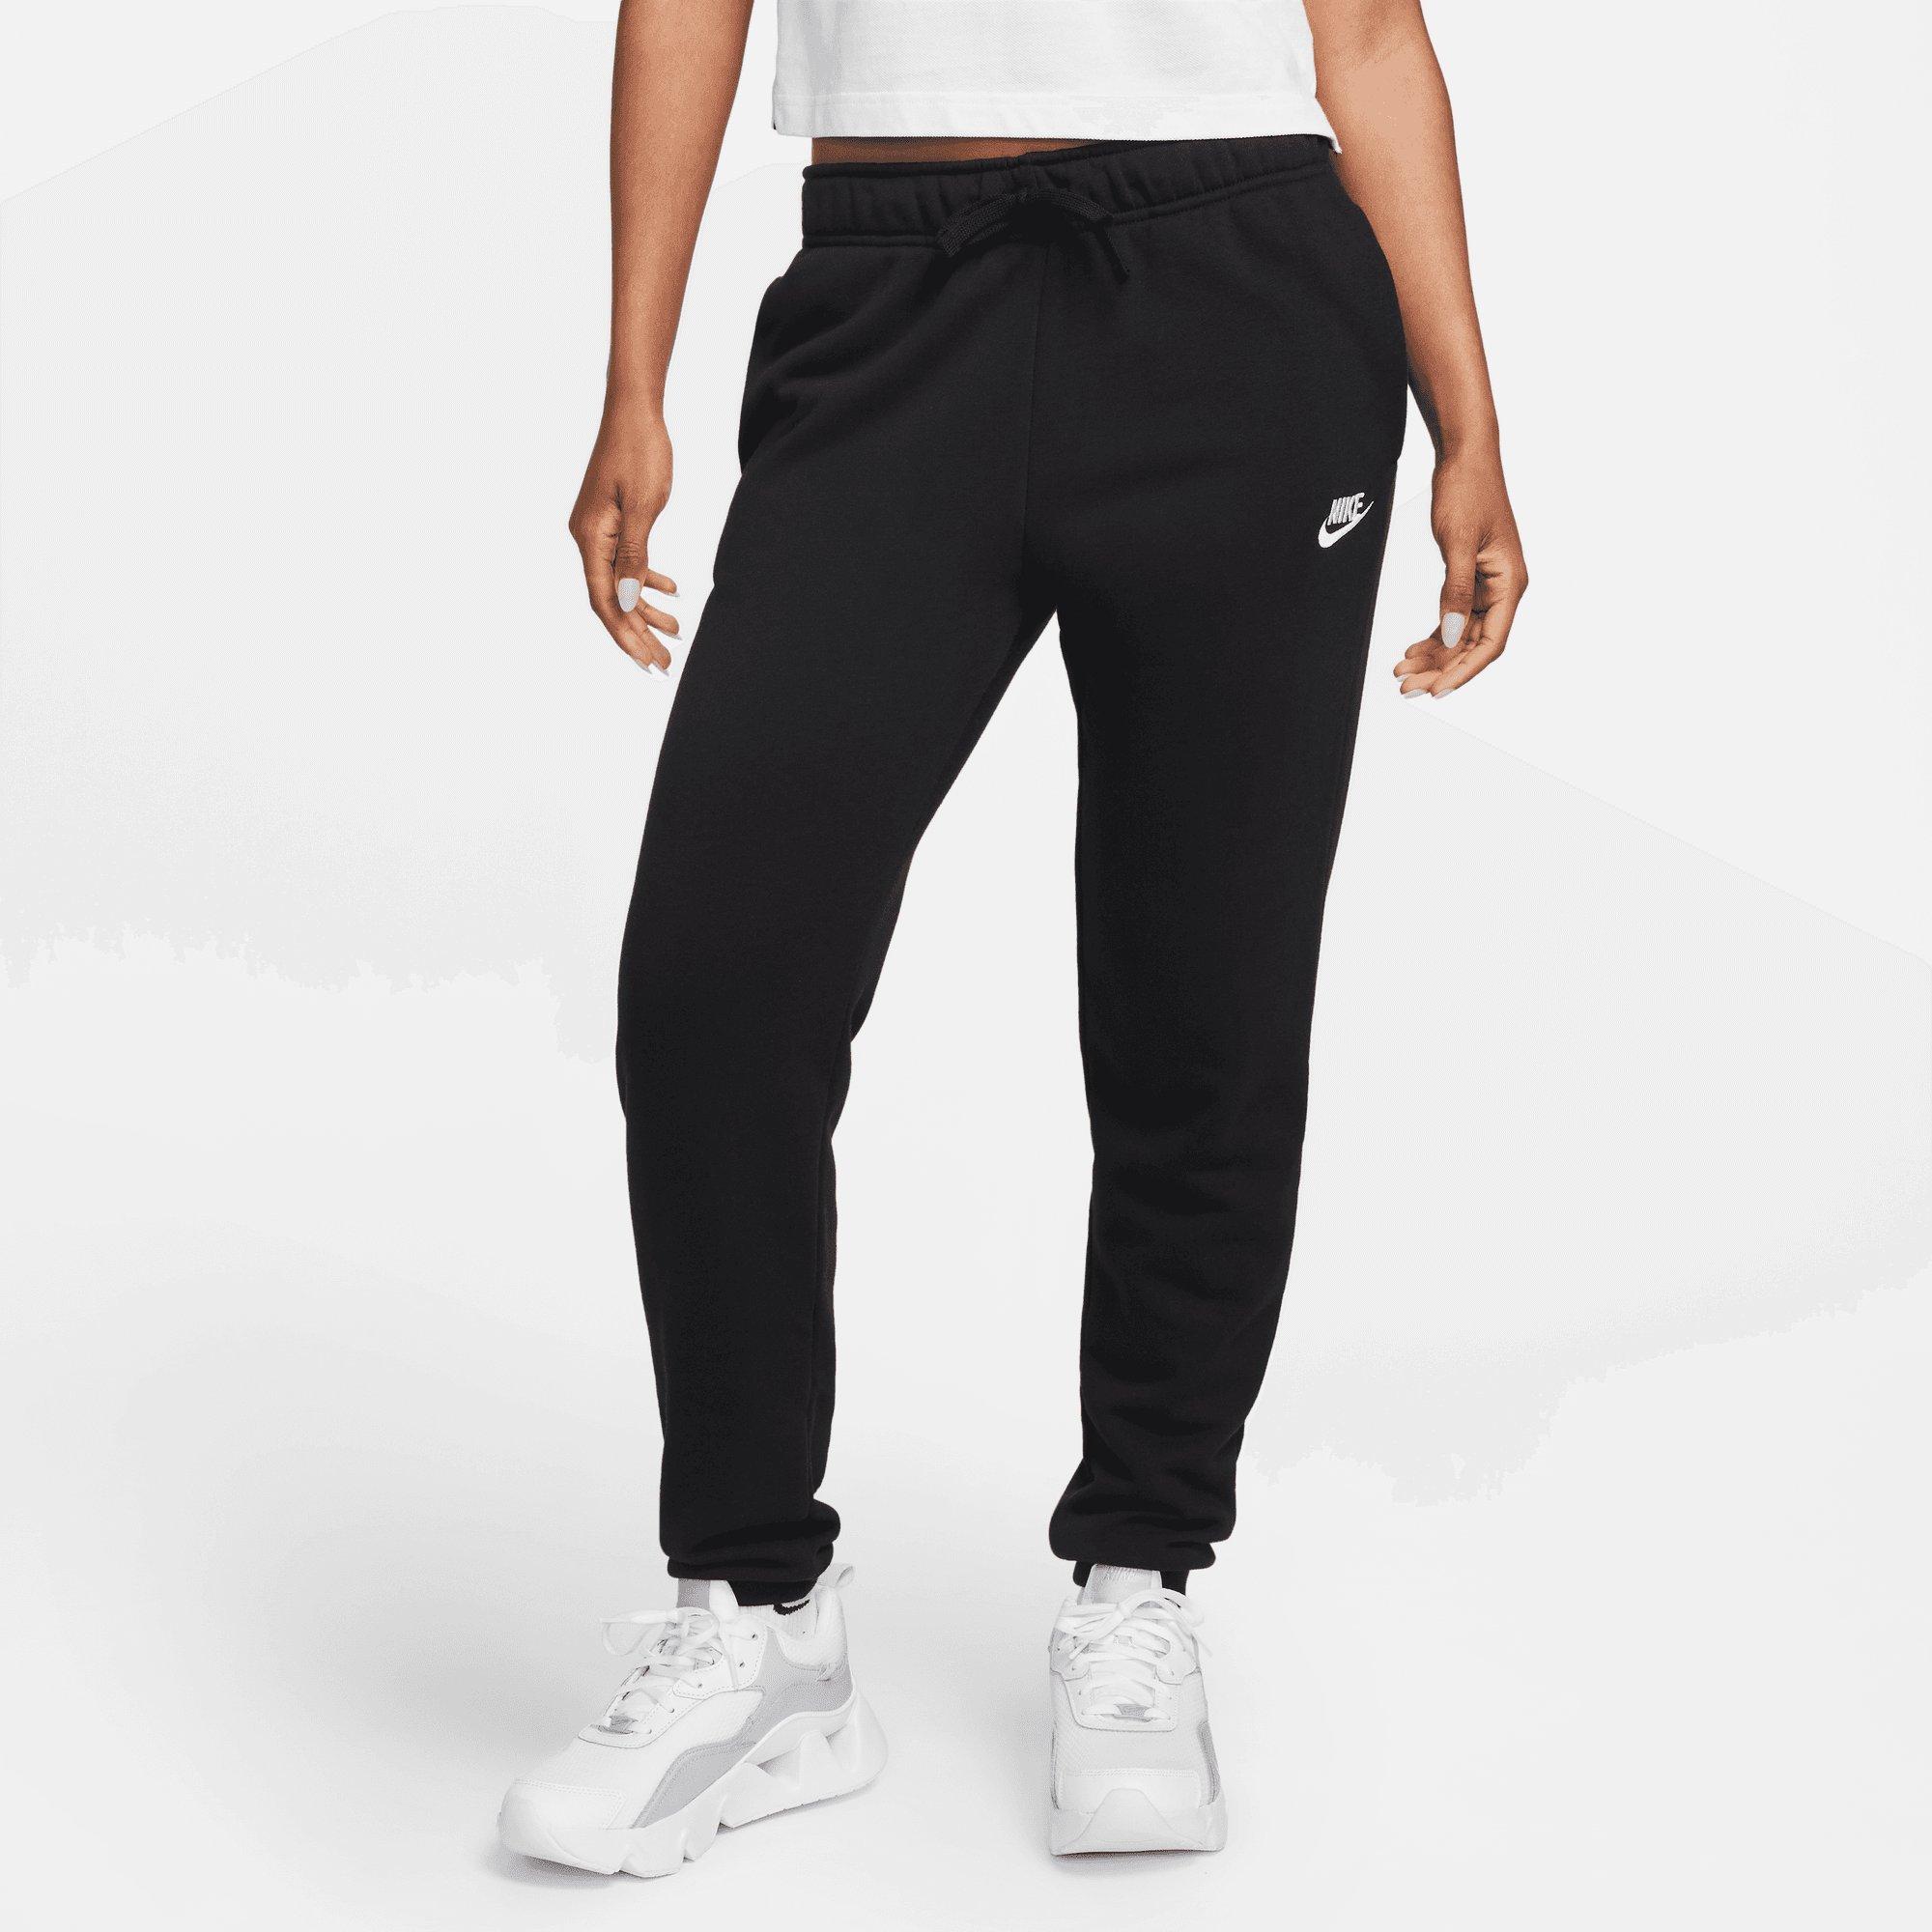  Nike Womens Academy 18 Tech Pant Black/White Size Small :  Clothing, Shoes & Jewelry